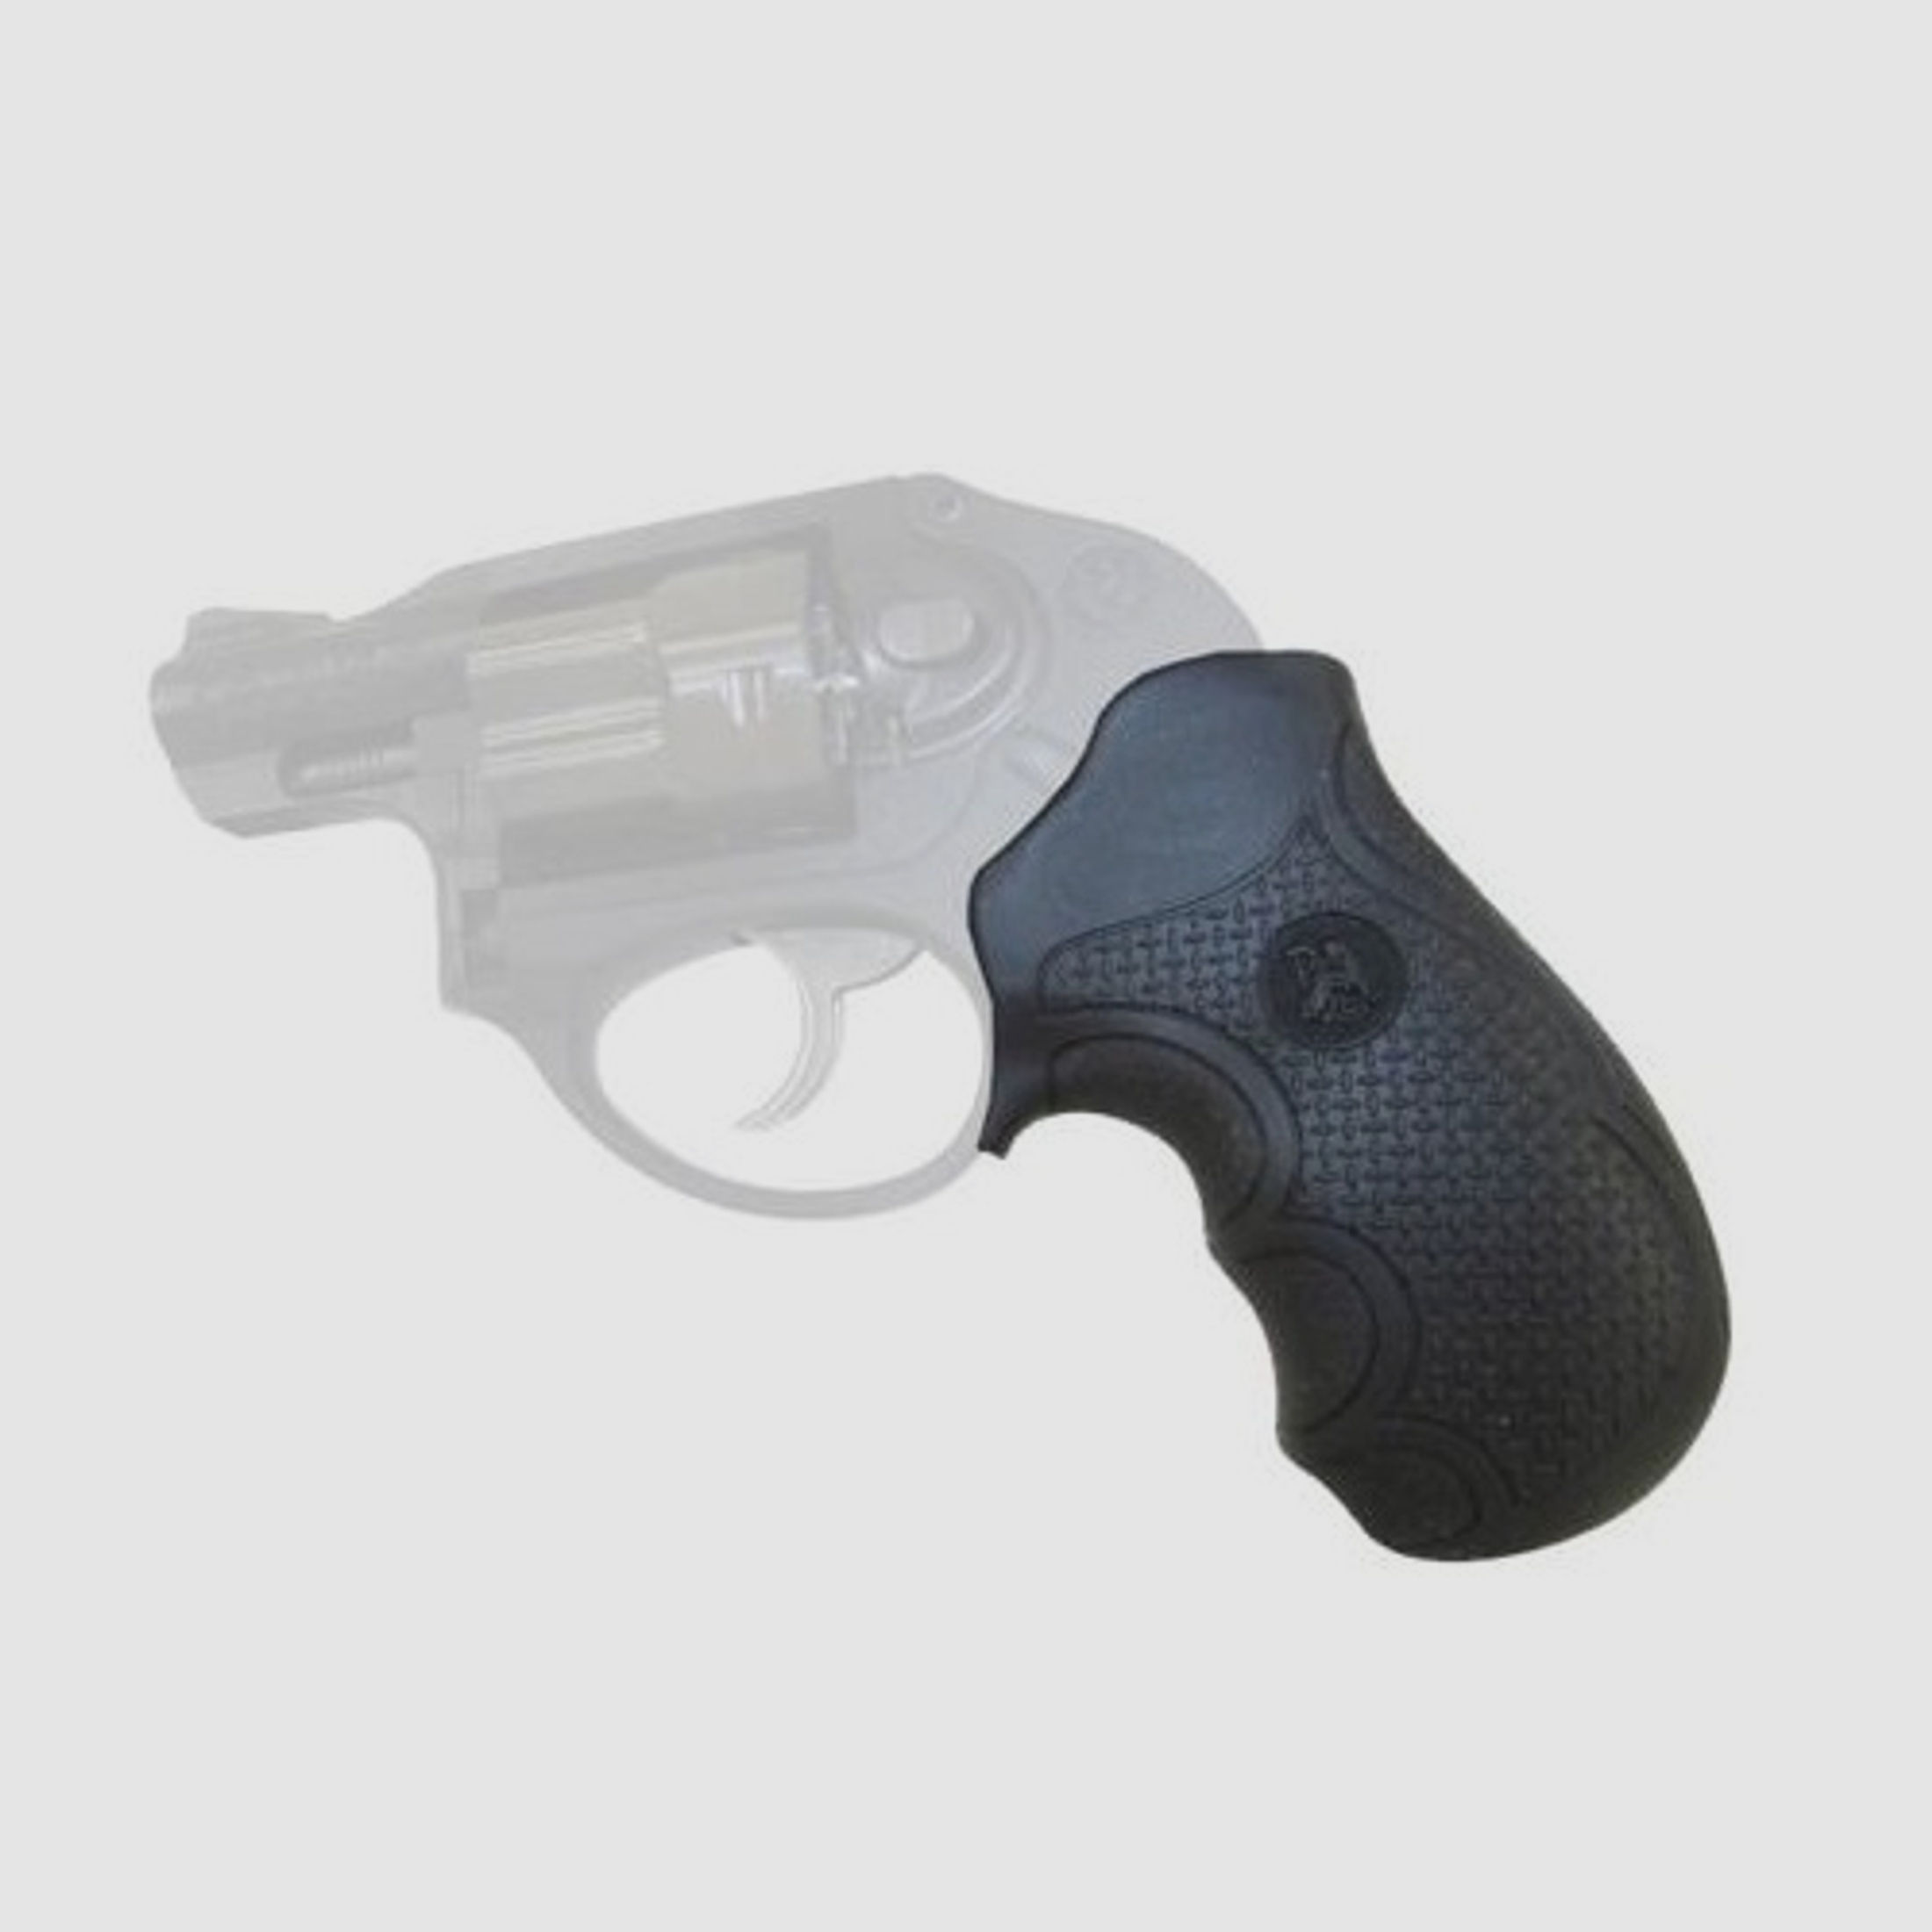 Pachmayr Griff Diamond Pro Ruger LCR